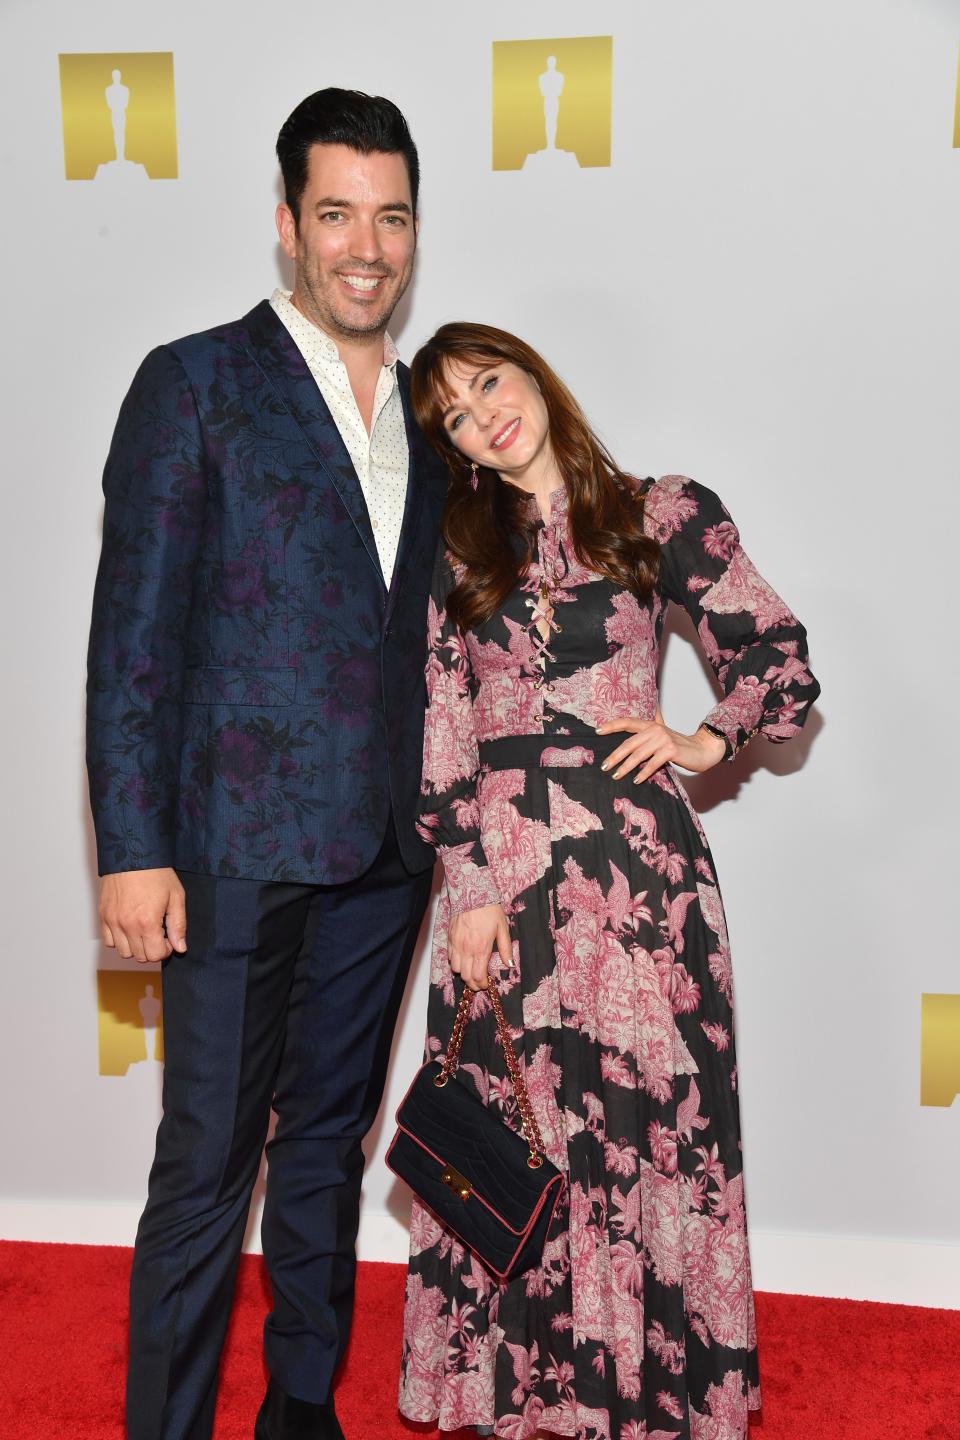 Jonathan Scott and Zooey Deschanel at an evening celebrating the opening of the Academy Museum of Motion Pictures at the Academy Museum on September 29, 2021 in Los Angeles, California. (Photo by Michael Buckner/Variety/Penske Media via Getty Images)